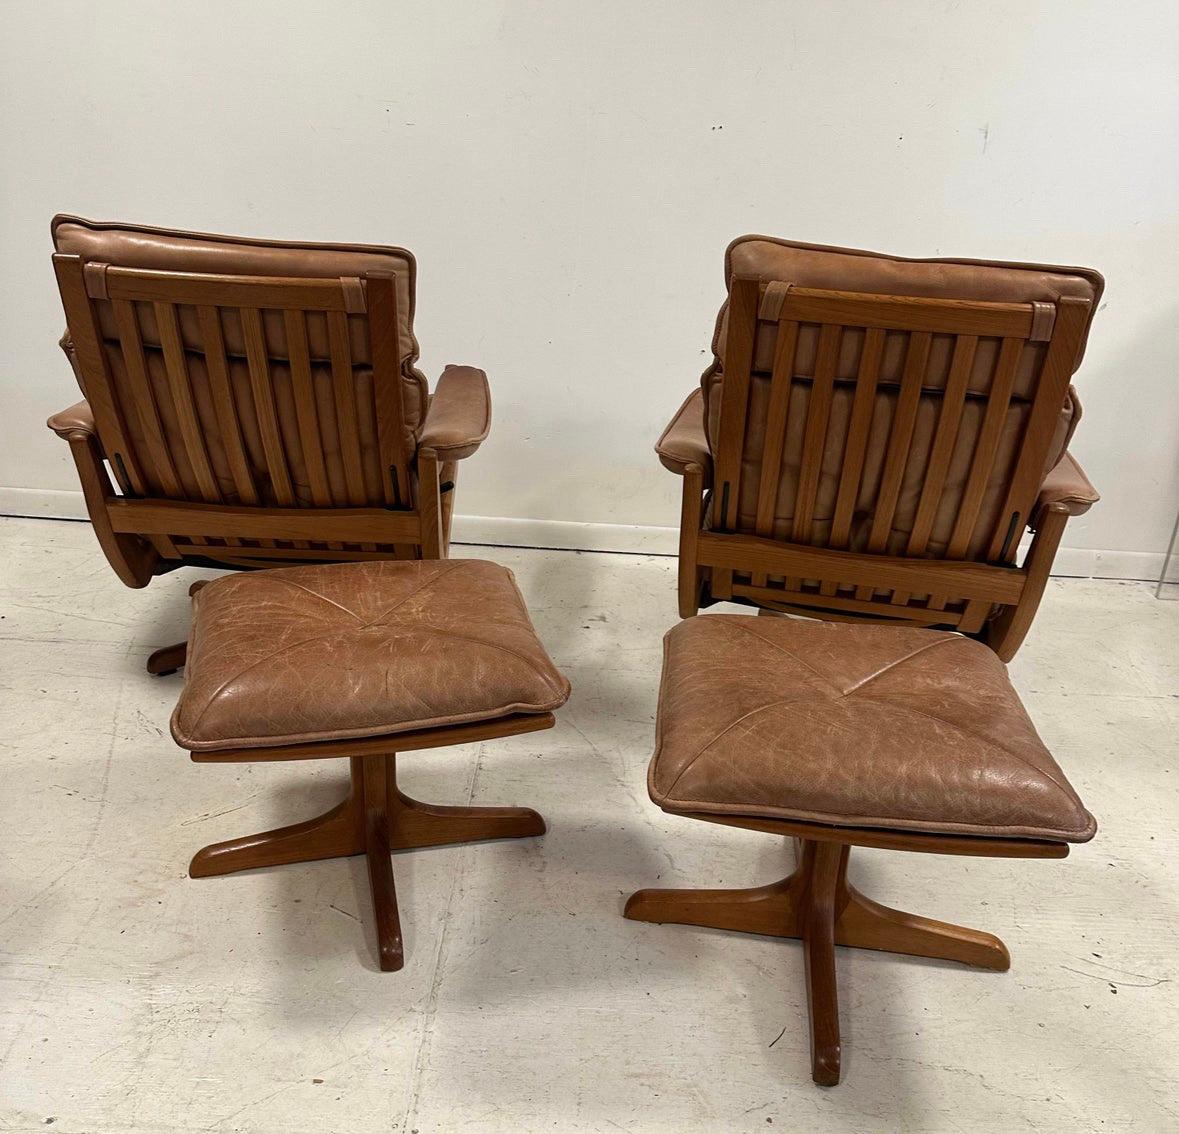 1970s soda galvino Denmark solid teak recliners with ottomans  For Sale 3